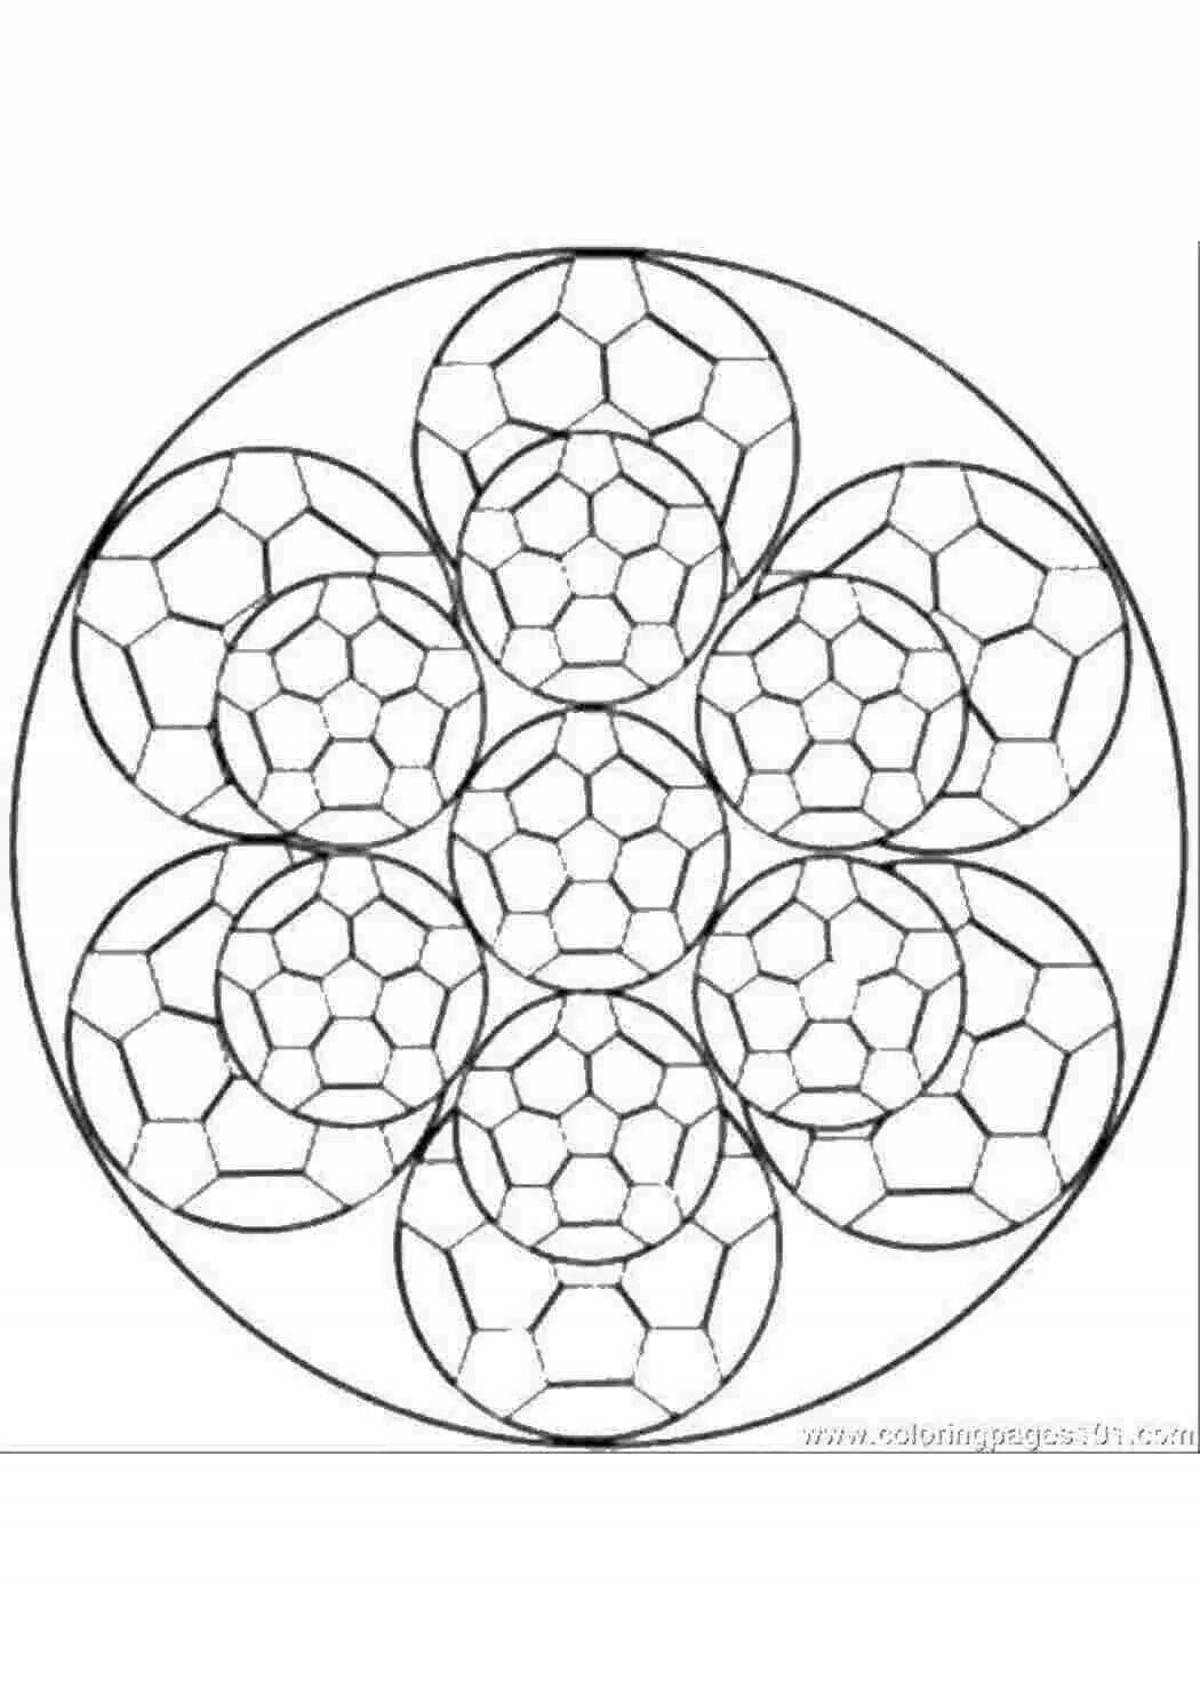 Happy kaleidoscope coloring page